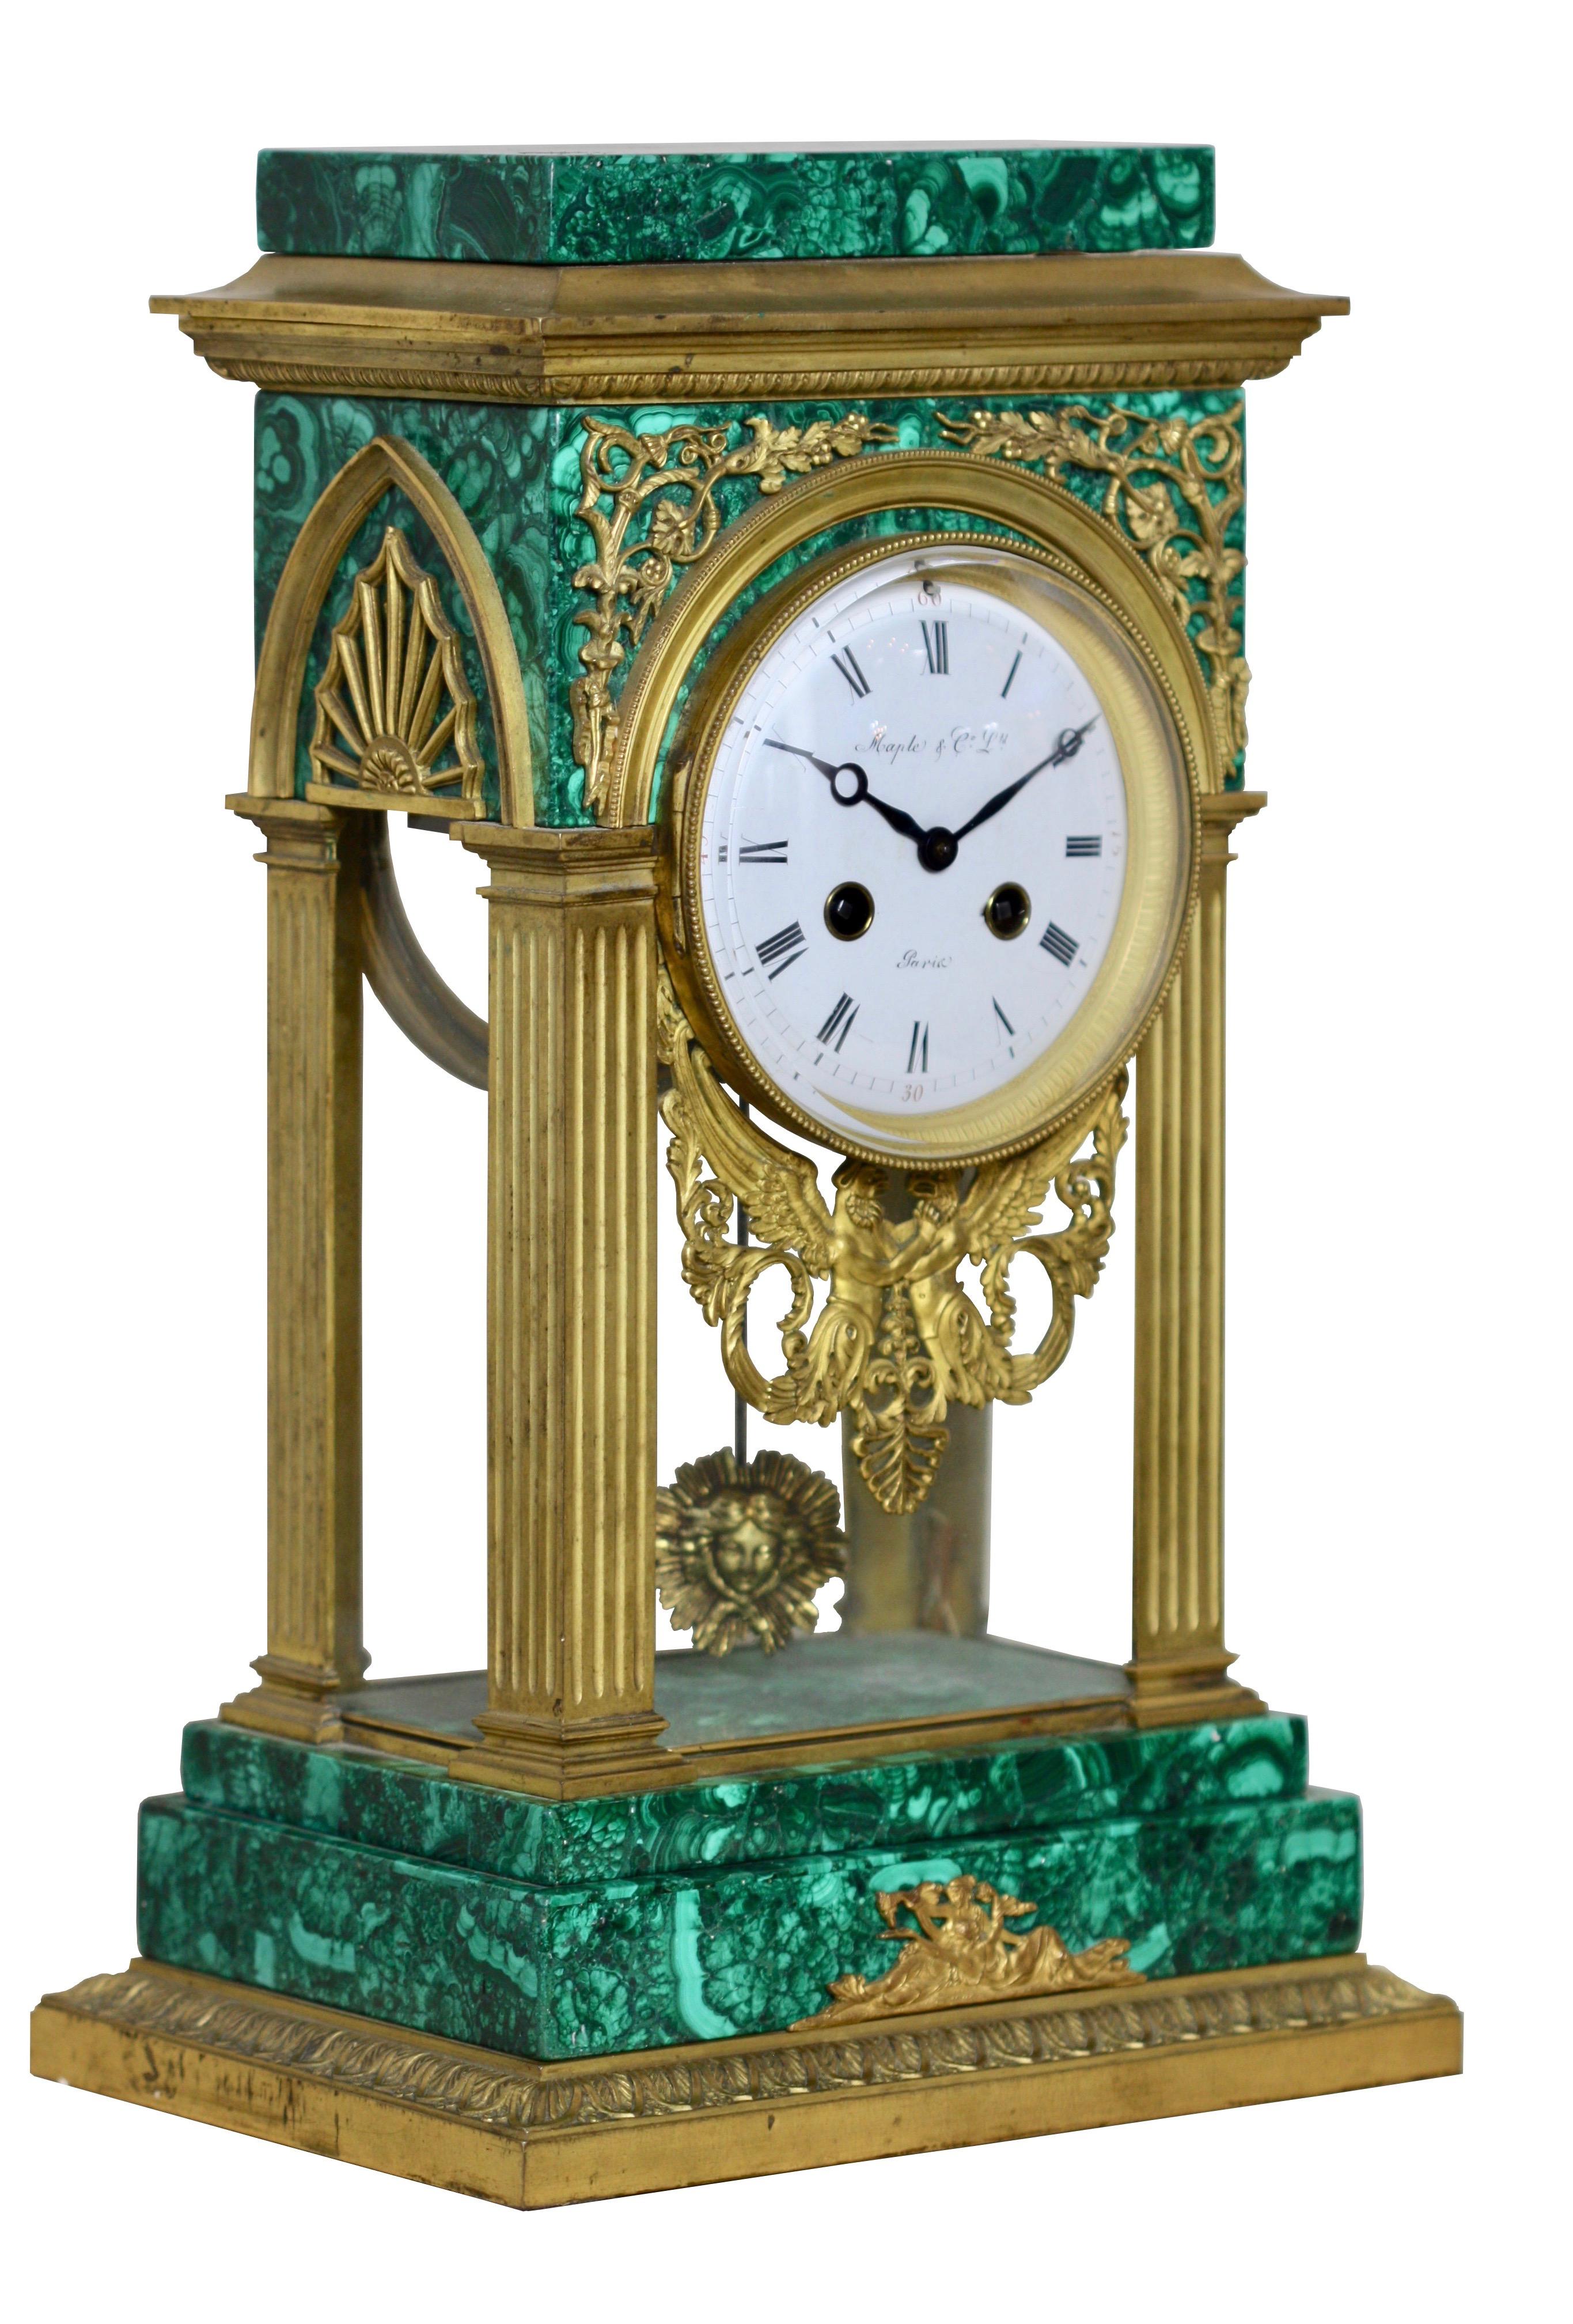 Gilt bronze mounted malachite mantel clock, Louis XVI style
Maple & Co.,
France, 19th century

The circular white enamel dial with black Arabic numerals, glazed front, sides and rear door, the base of the dial decorated by a cast mount in the